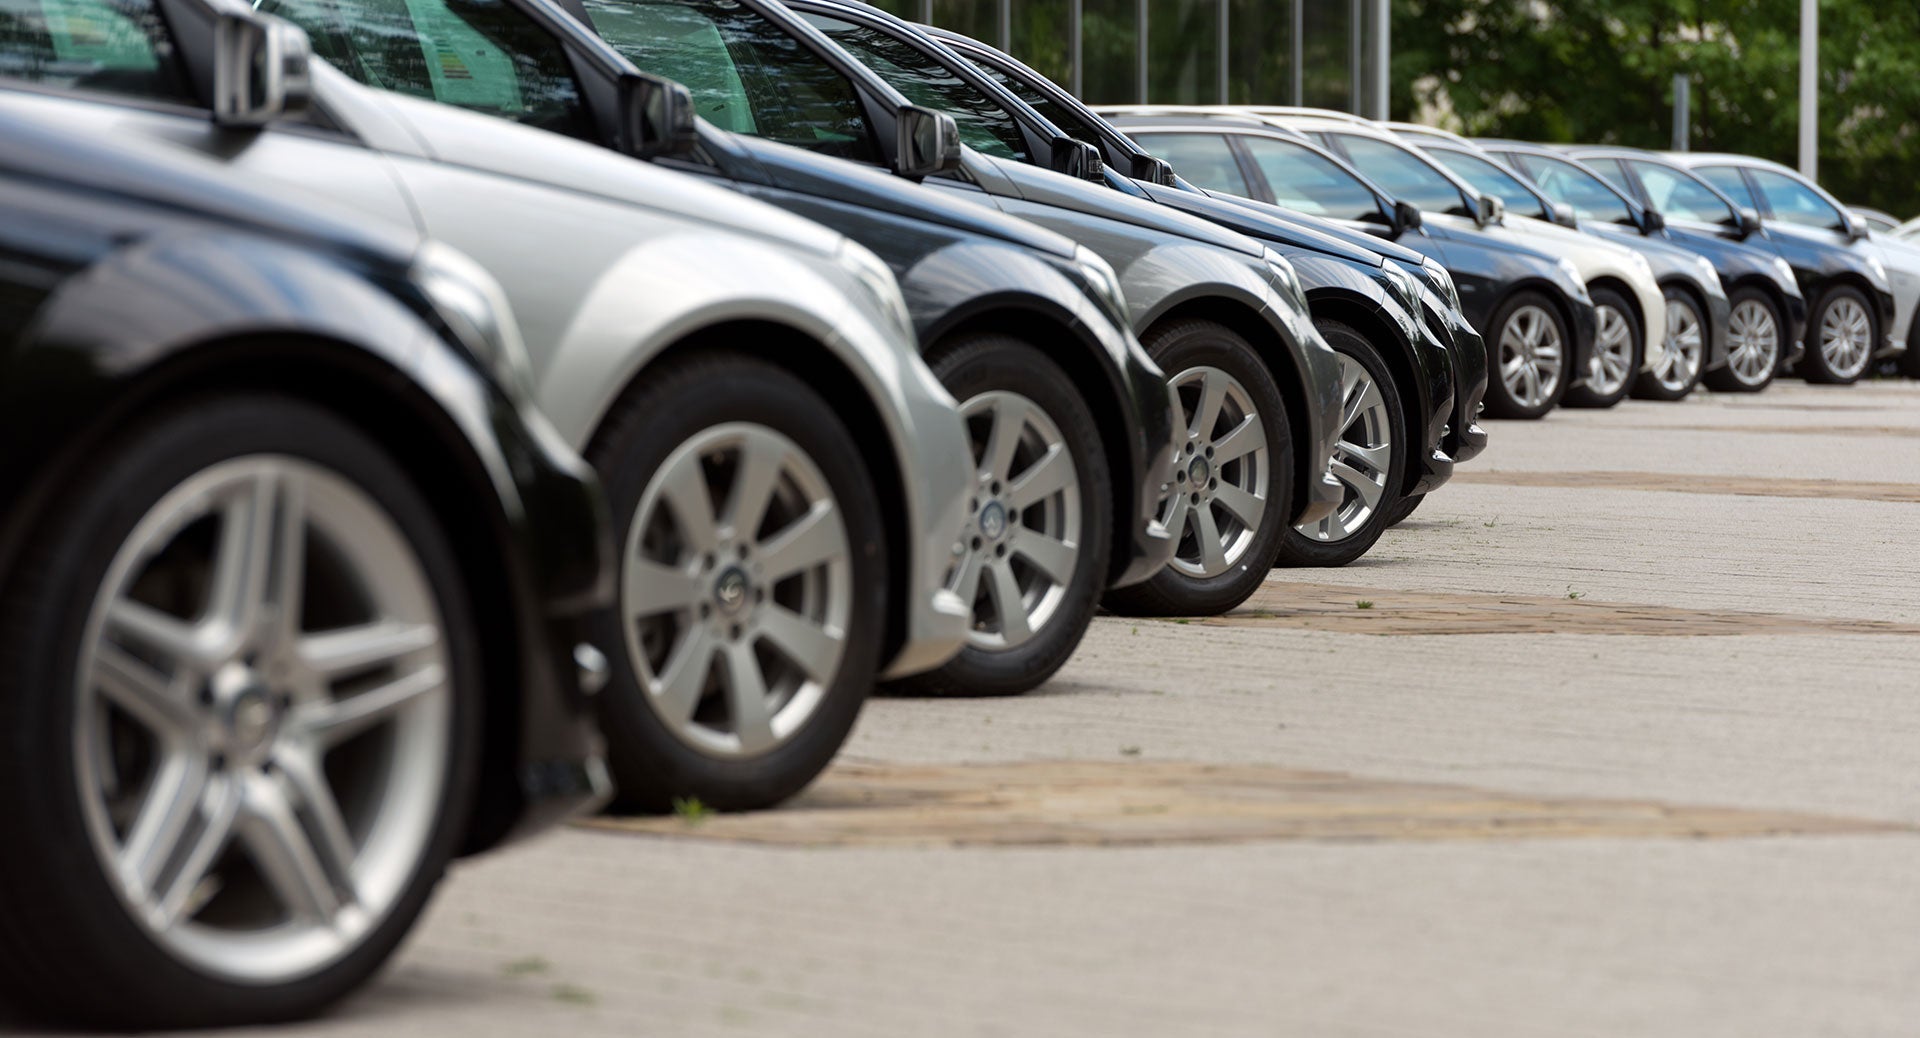 Explore Our Wide Selection of New and Used Vehicles